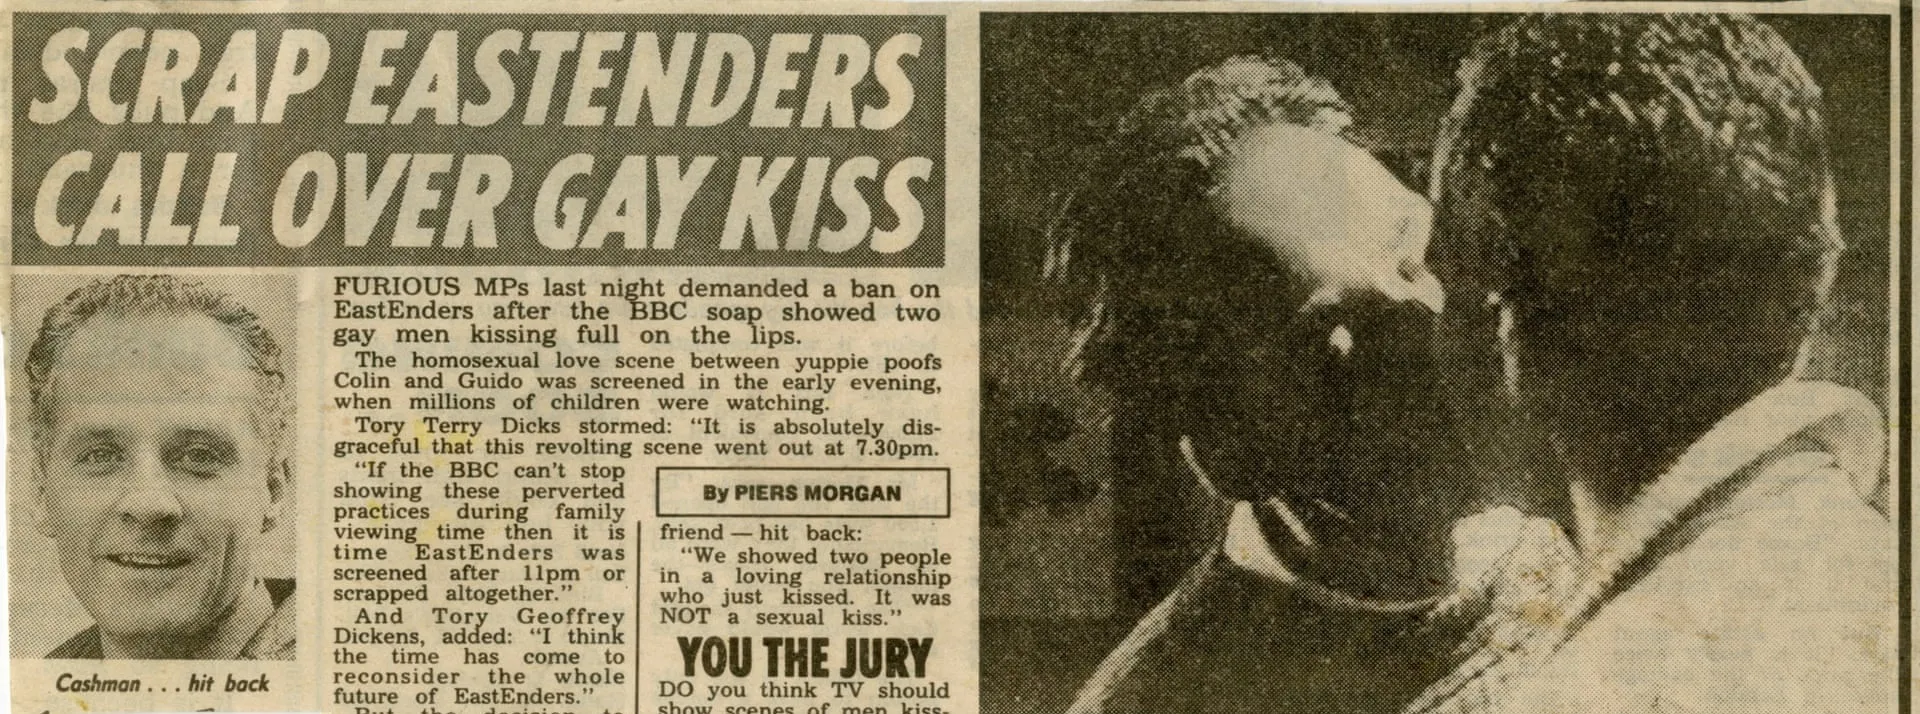 Piers Morgan penned the article for The Sun in 1989